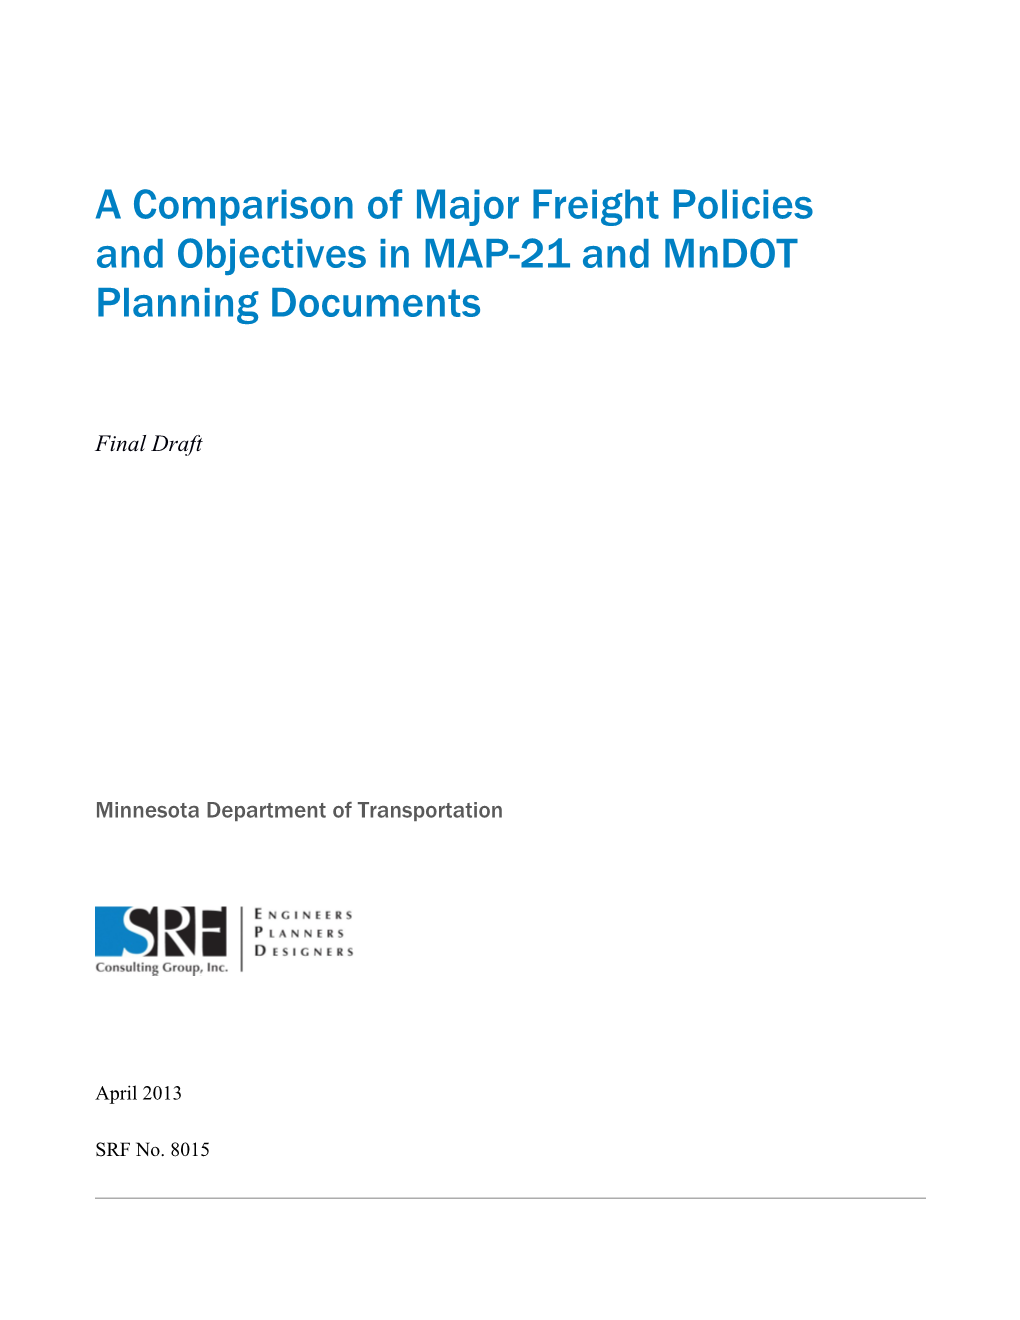 A Comparison of Major Freight Policies and Objectives in MAP-21 and Mndot Planning Documents